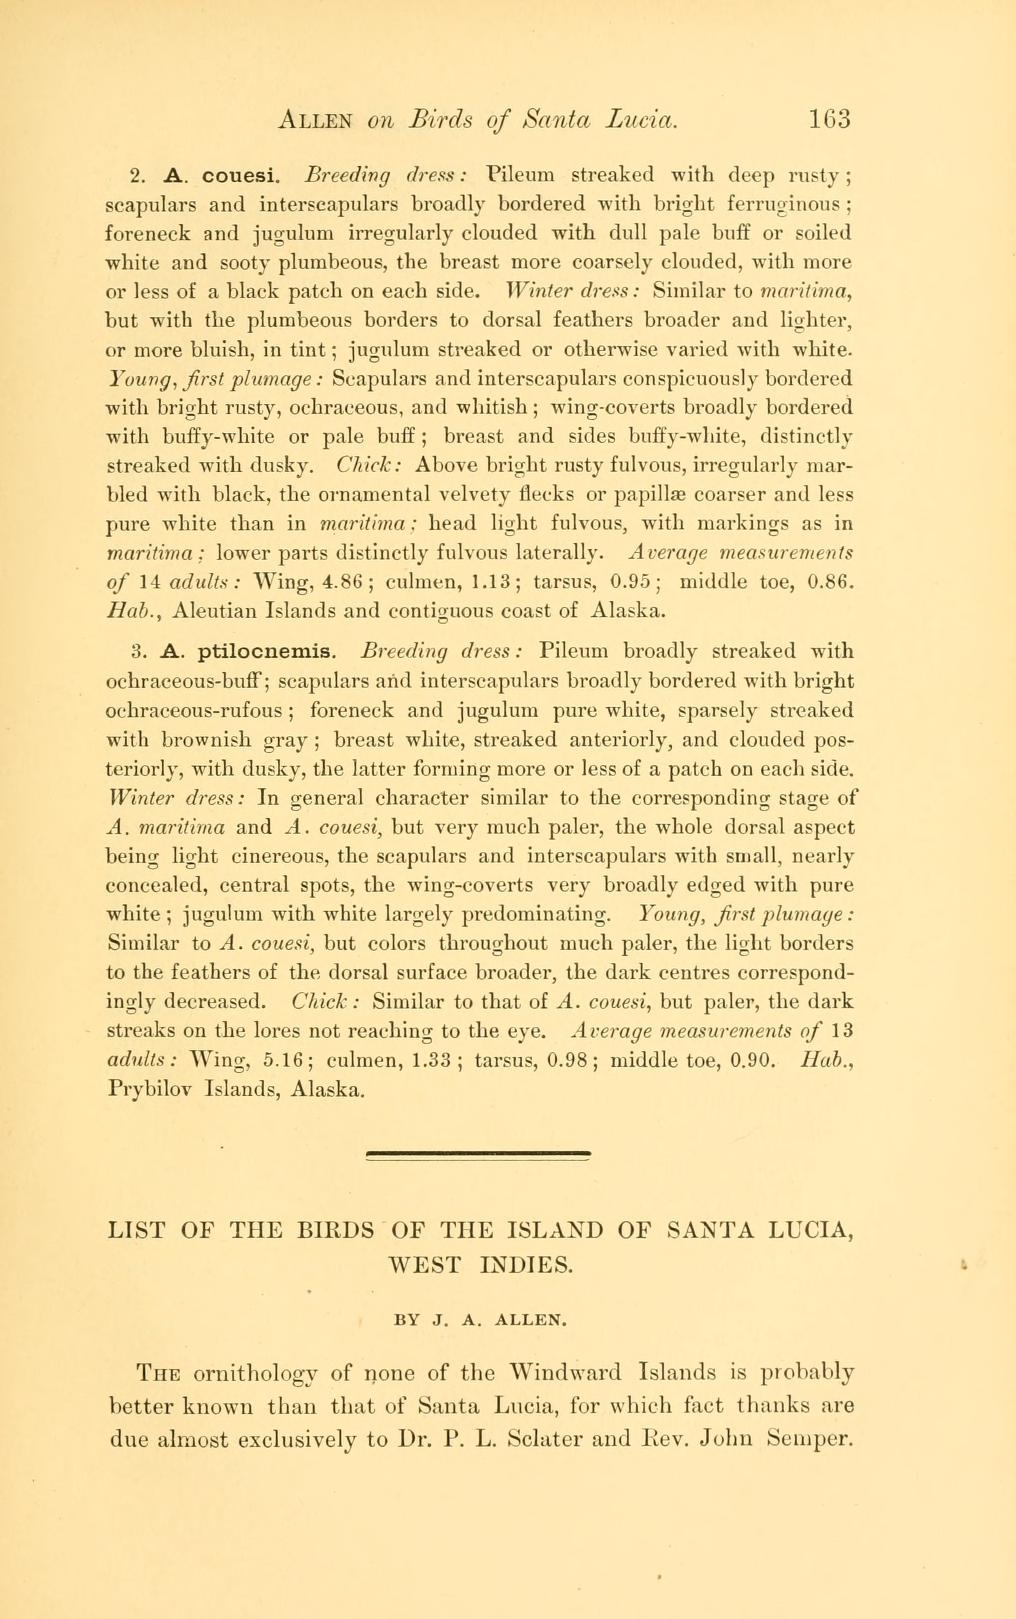 List of the Birds of the Island of Santa Lucia, West Indies